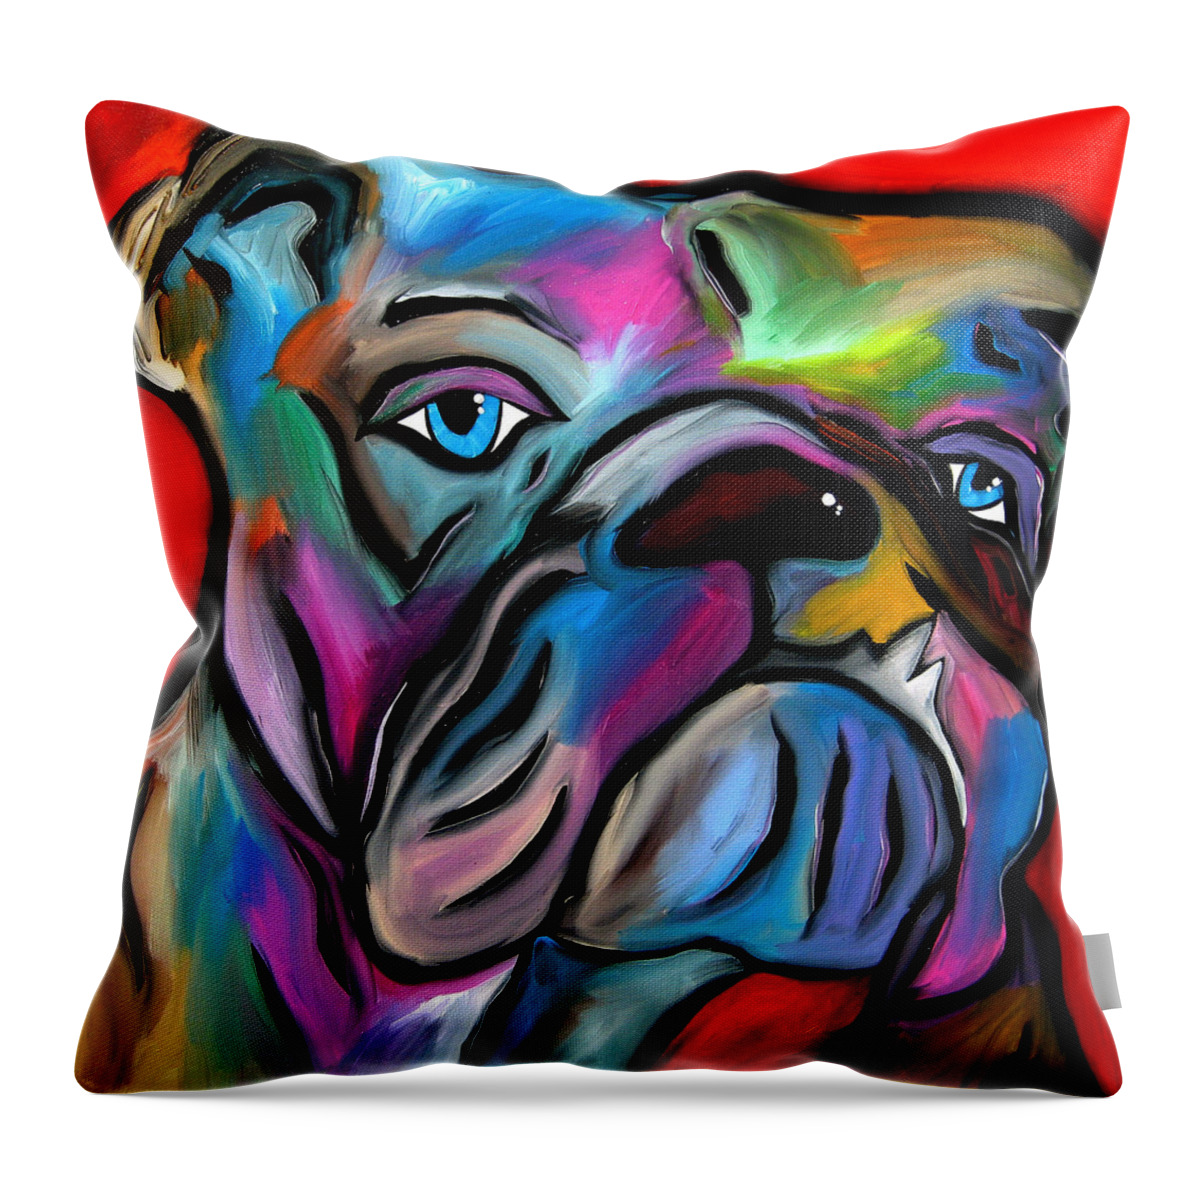 Pop Art Throw Pillow featuring the painting That's Bull - Abstract Dog Pop Art by Fidostudio by Tom Fedro